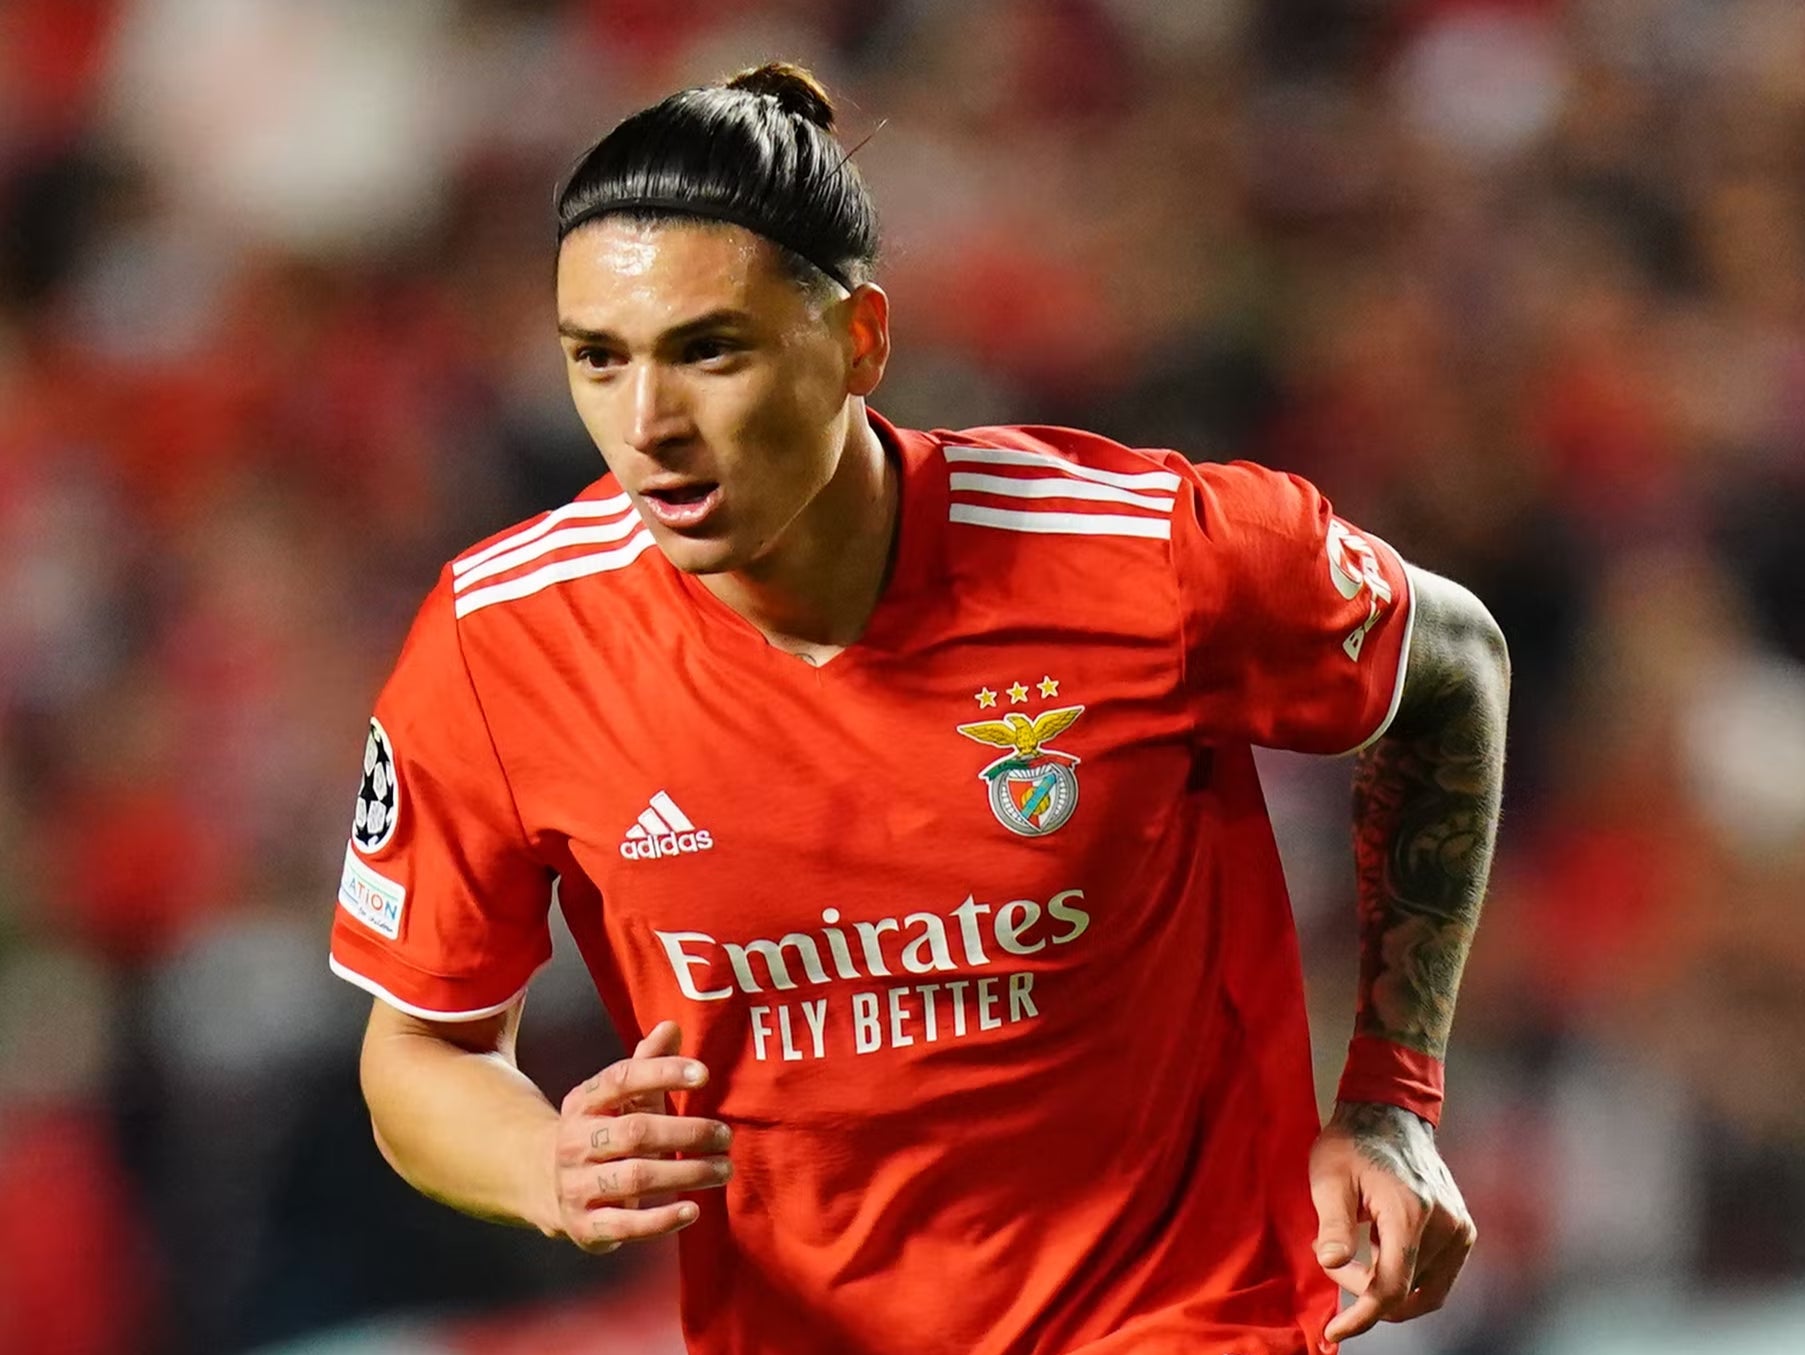 Despite reports that 22-year-old Benfica striker Darwin Nunez has agreed on personal terms with Liverpool, the Daily Express writes that his agent will meet with Manchester United, who are looking to block the move to Anfield (Adam Davy/PA)